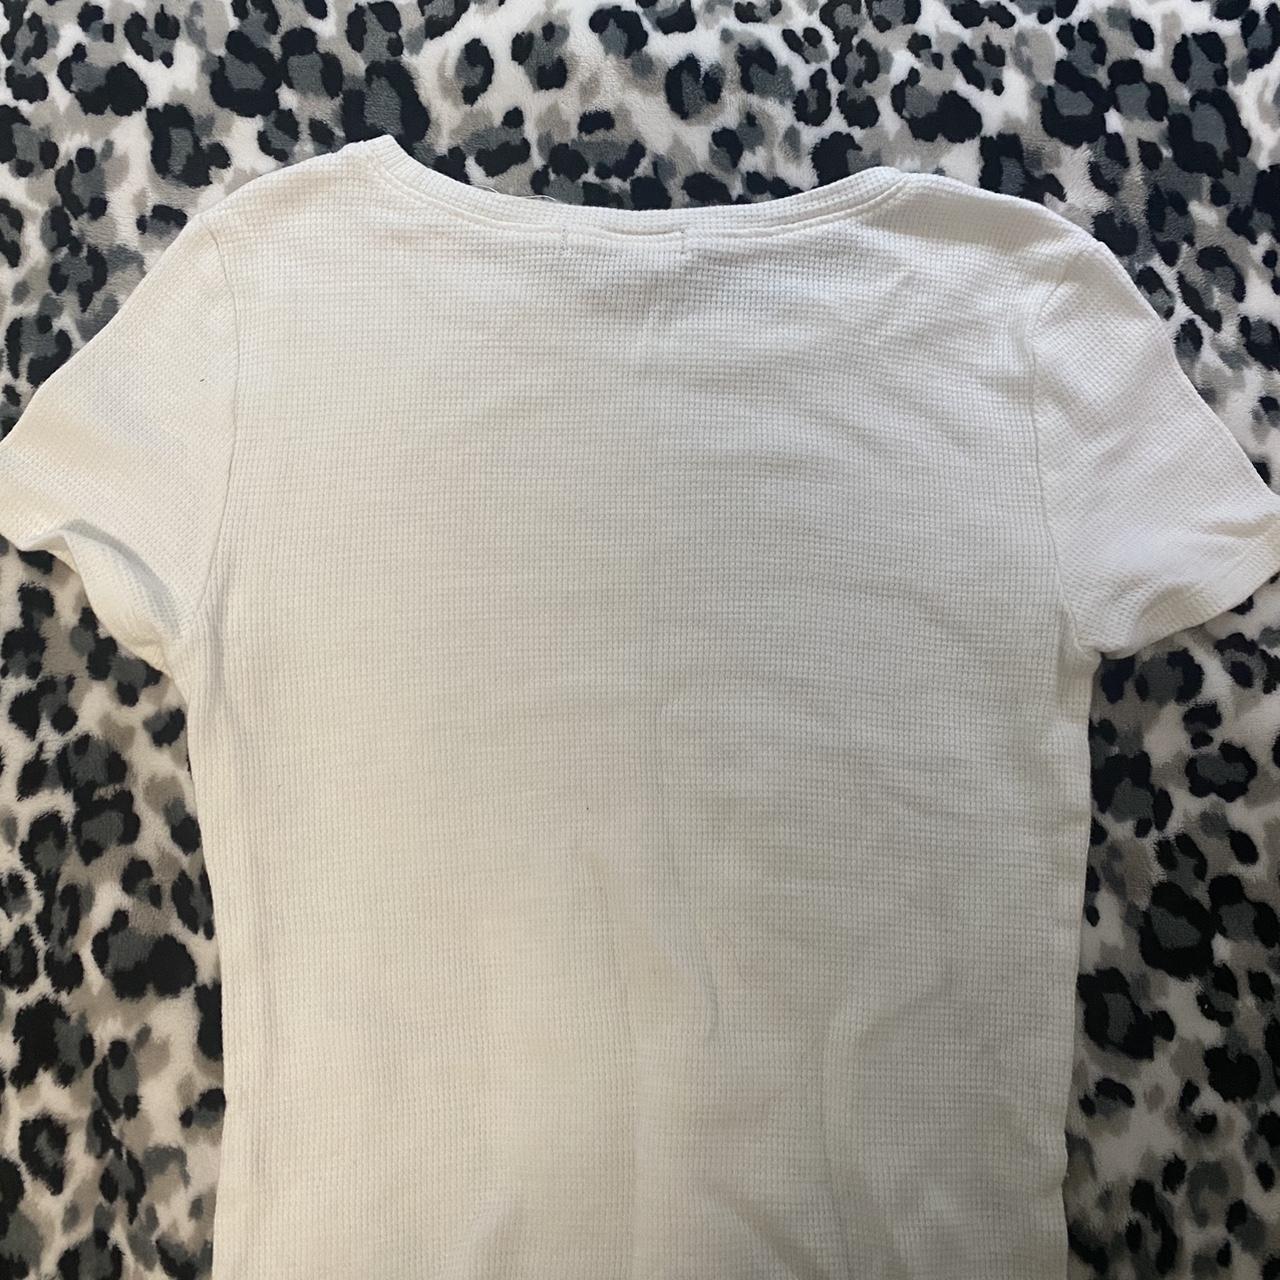 Forever 21 Women's White and Brown Crop-top | Depop